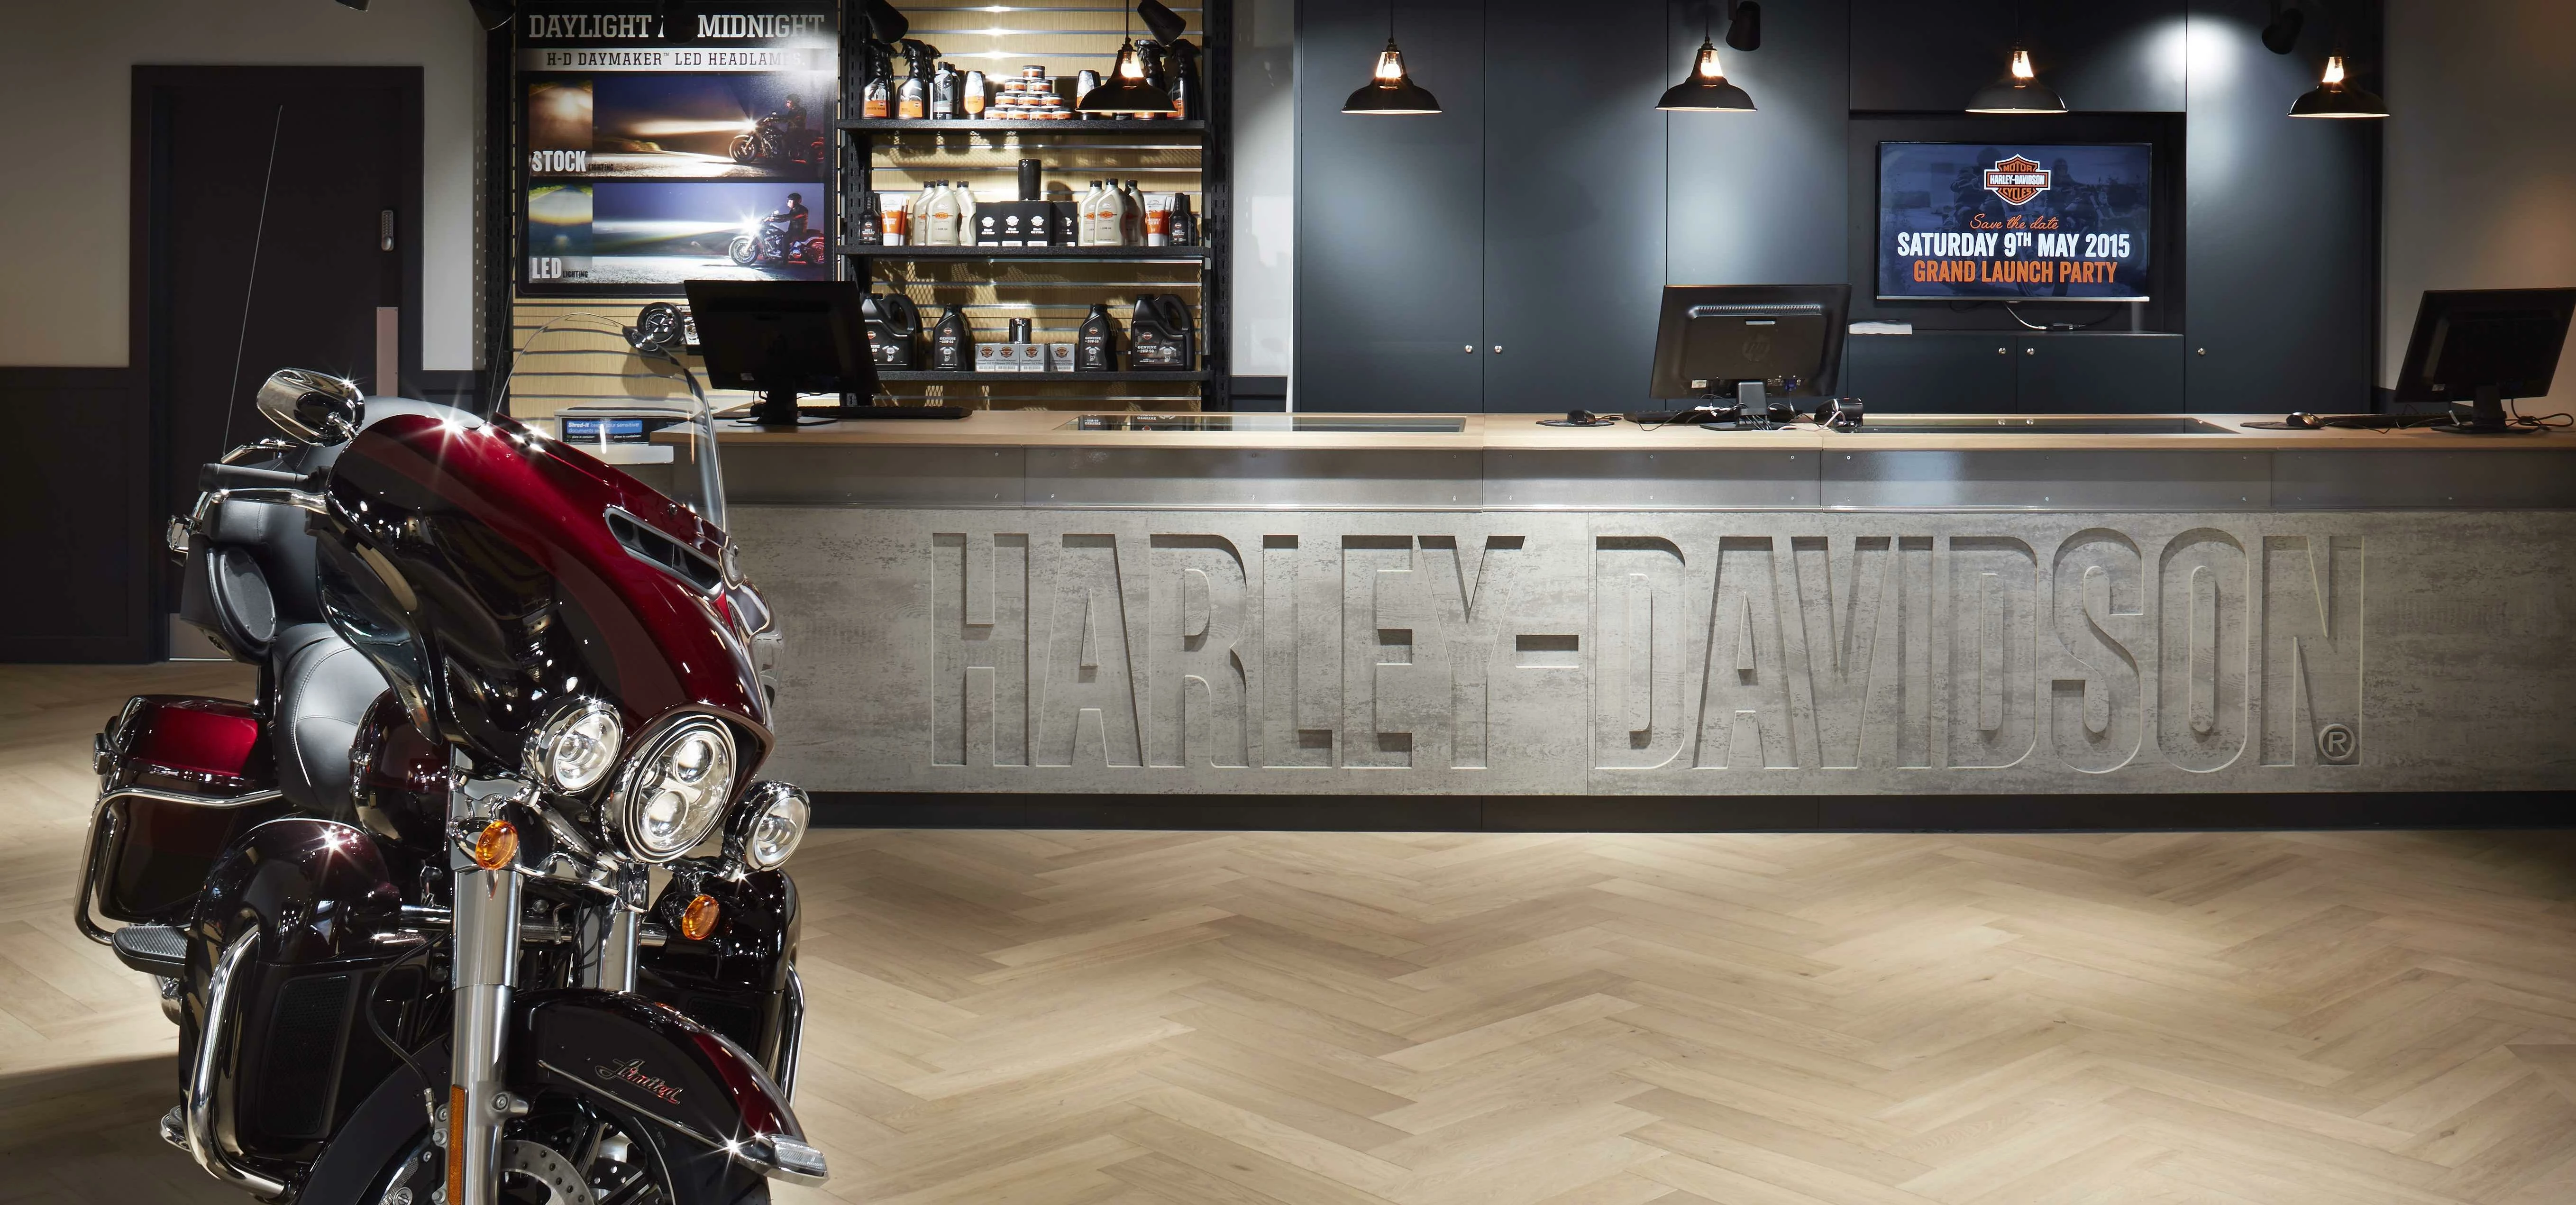 Muted lighted entices bikers at Fresh Design International's revamped Harley-Davidson store